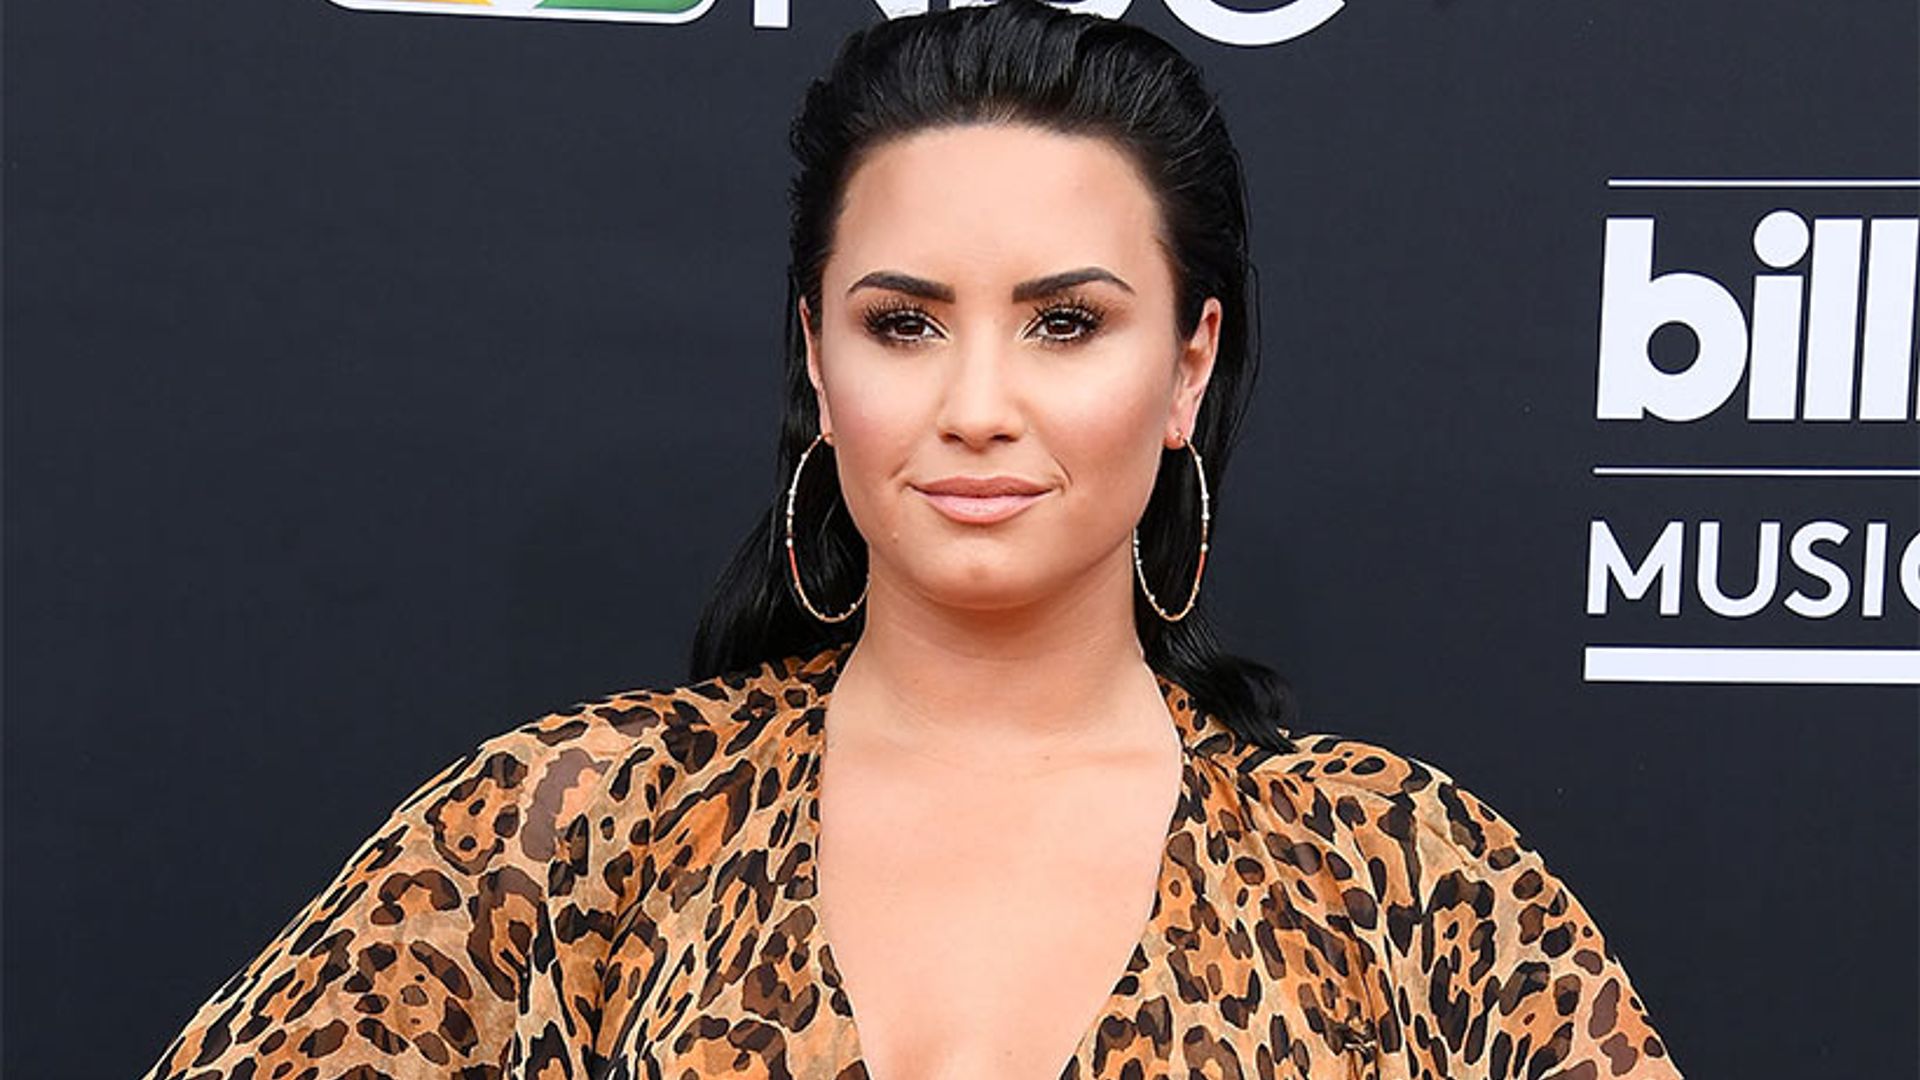 What is Narcan and why was it used on Demi Lovato after her suspected overdose?